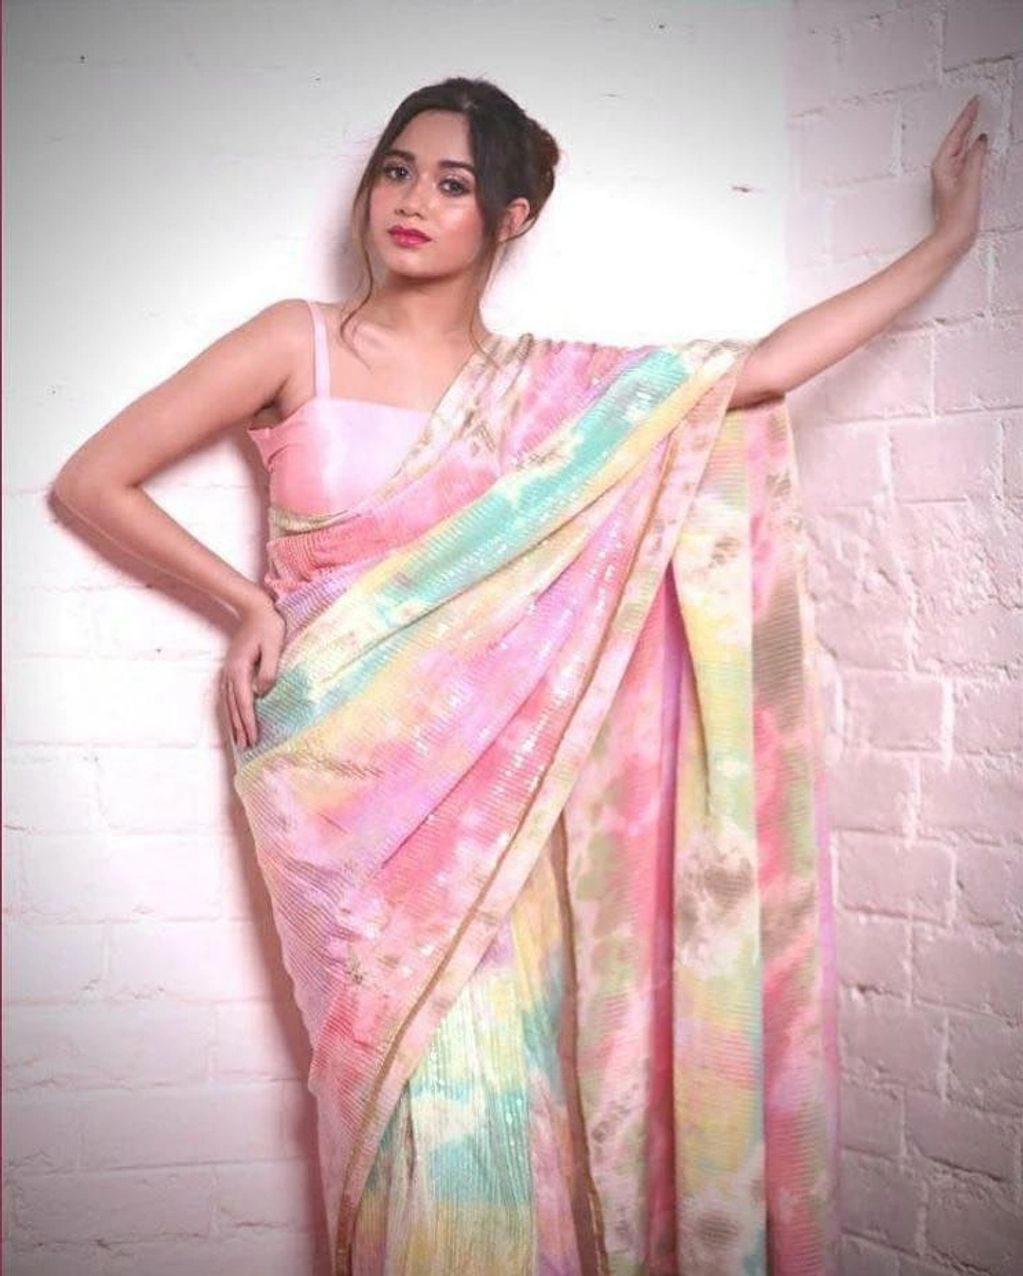 DESIGN TYPE-SAREE
FABRIC - TIE AND DYE WITH WATER SEQUENCE EFFECT.